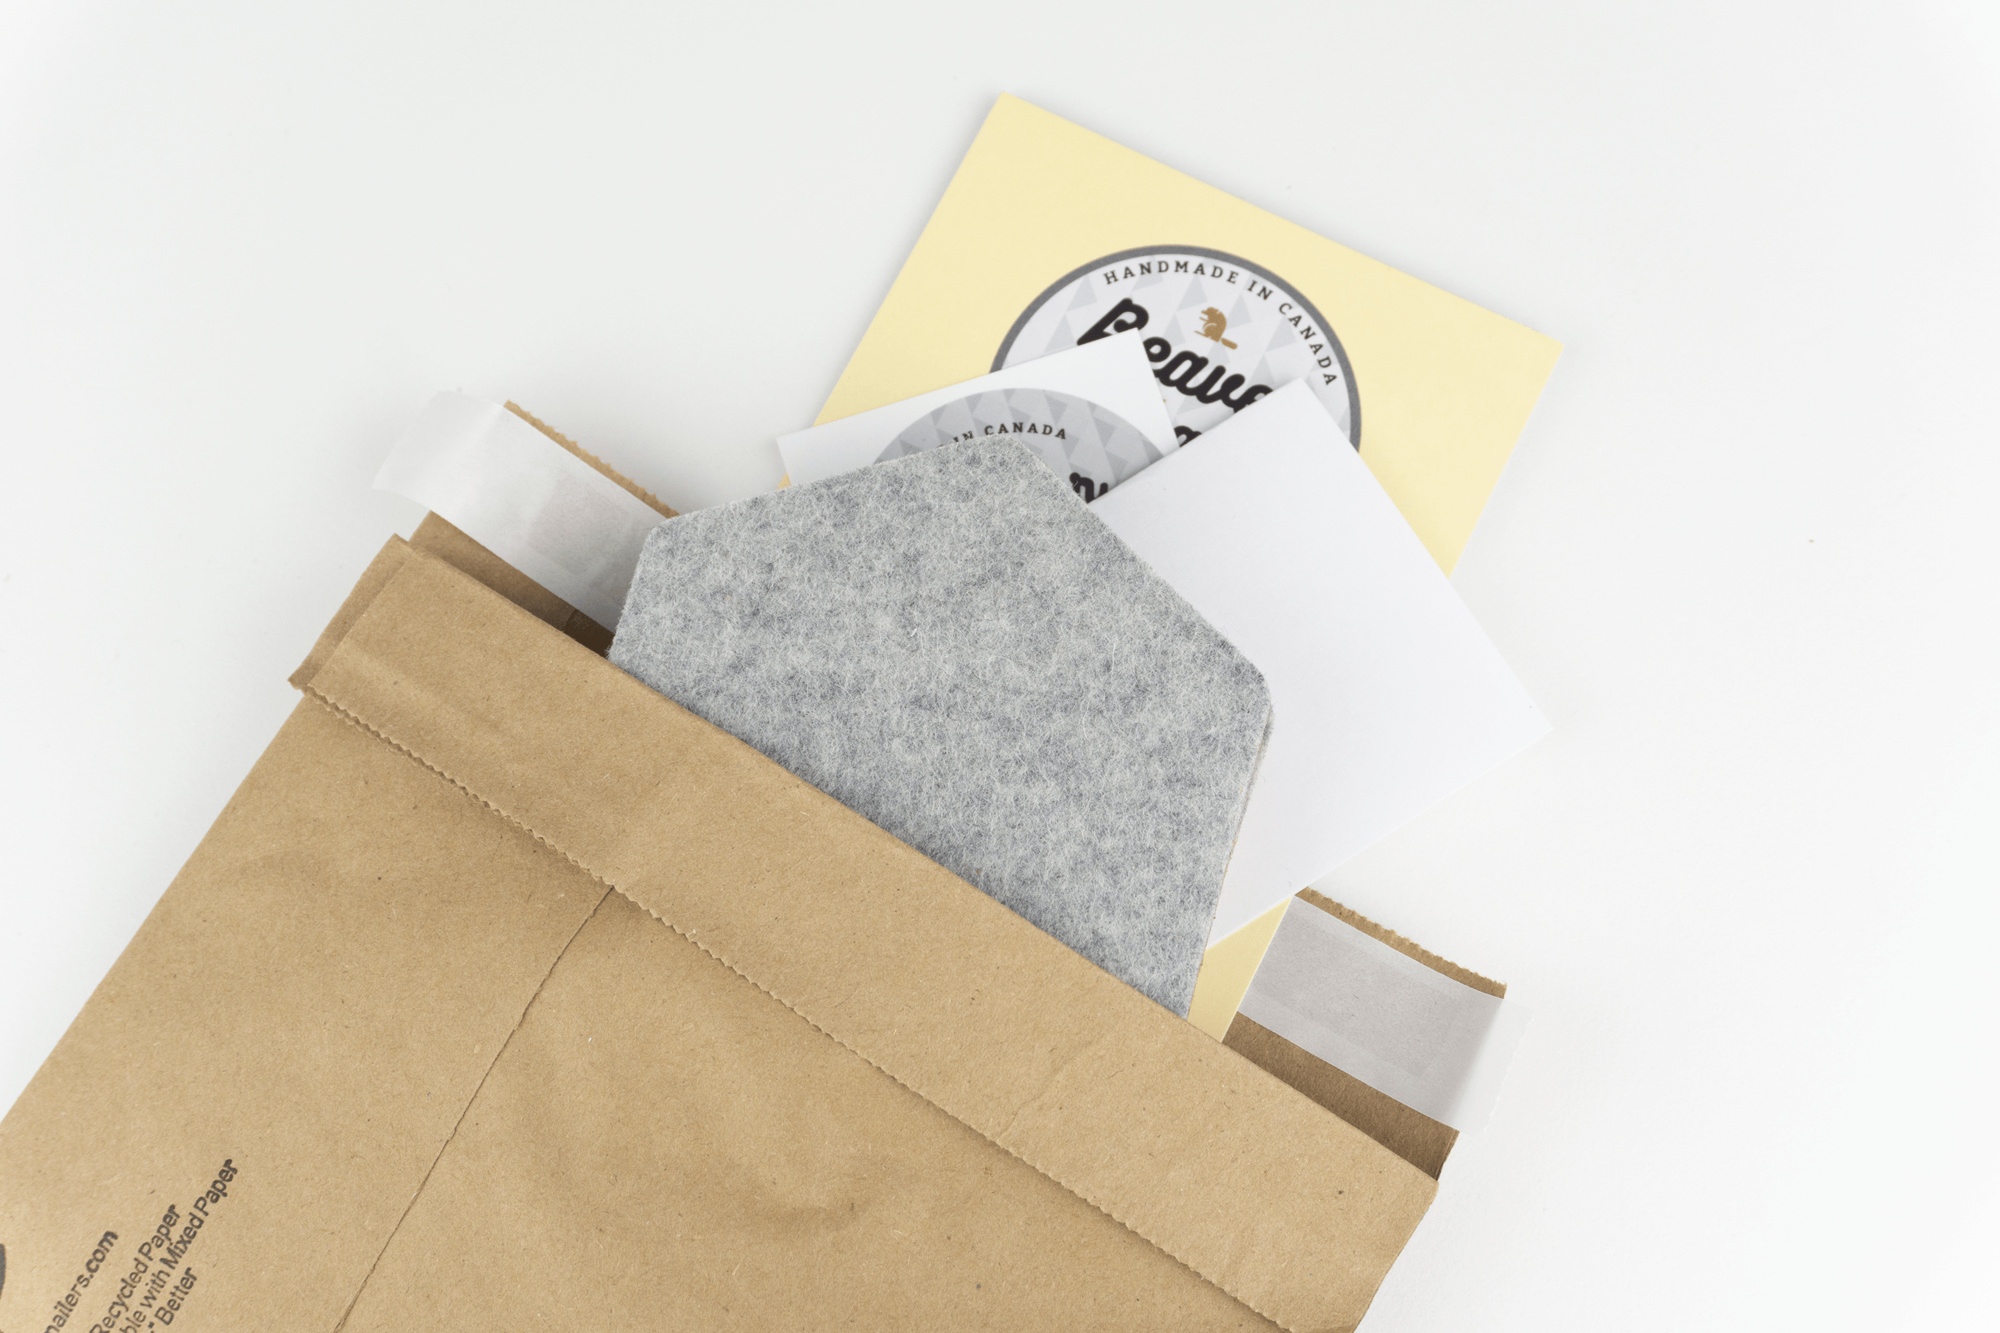 The recyclable kraft paper packaging we use for our hexagon desk coasters shown up close against a white background.